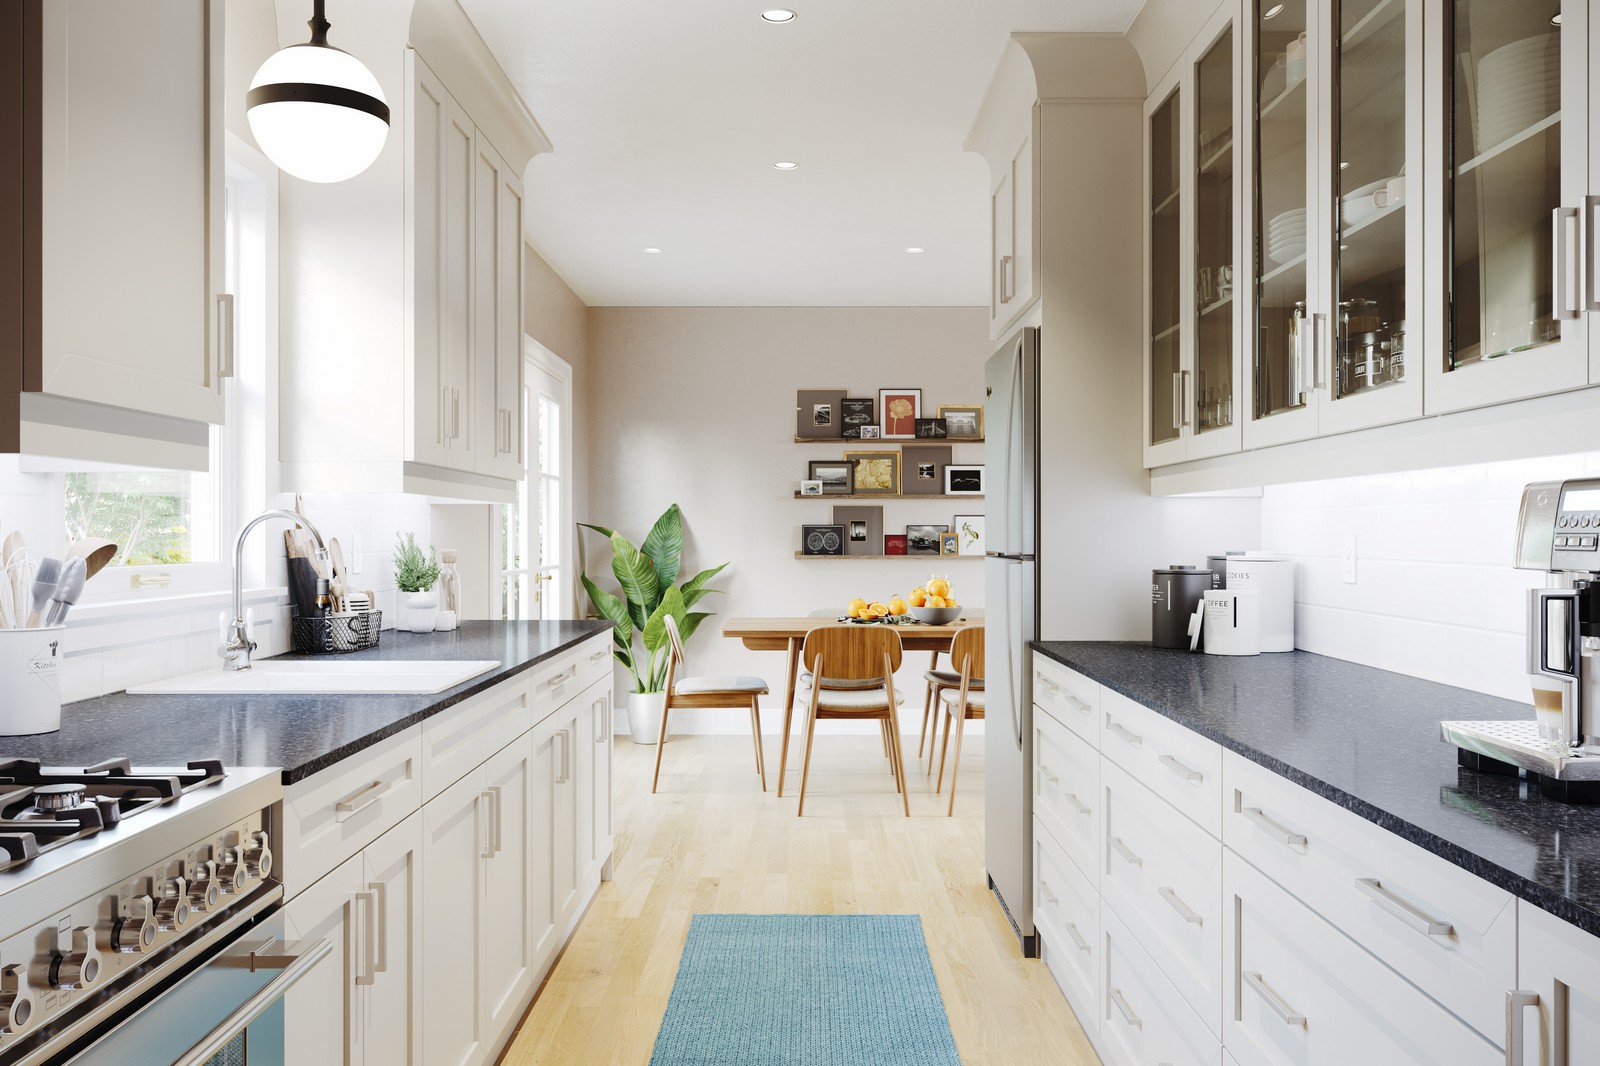 Kitchen Beauty Shots Showcasing The Cabinetry Style - , 6